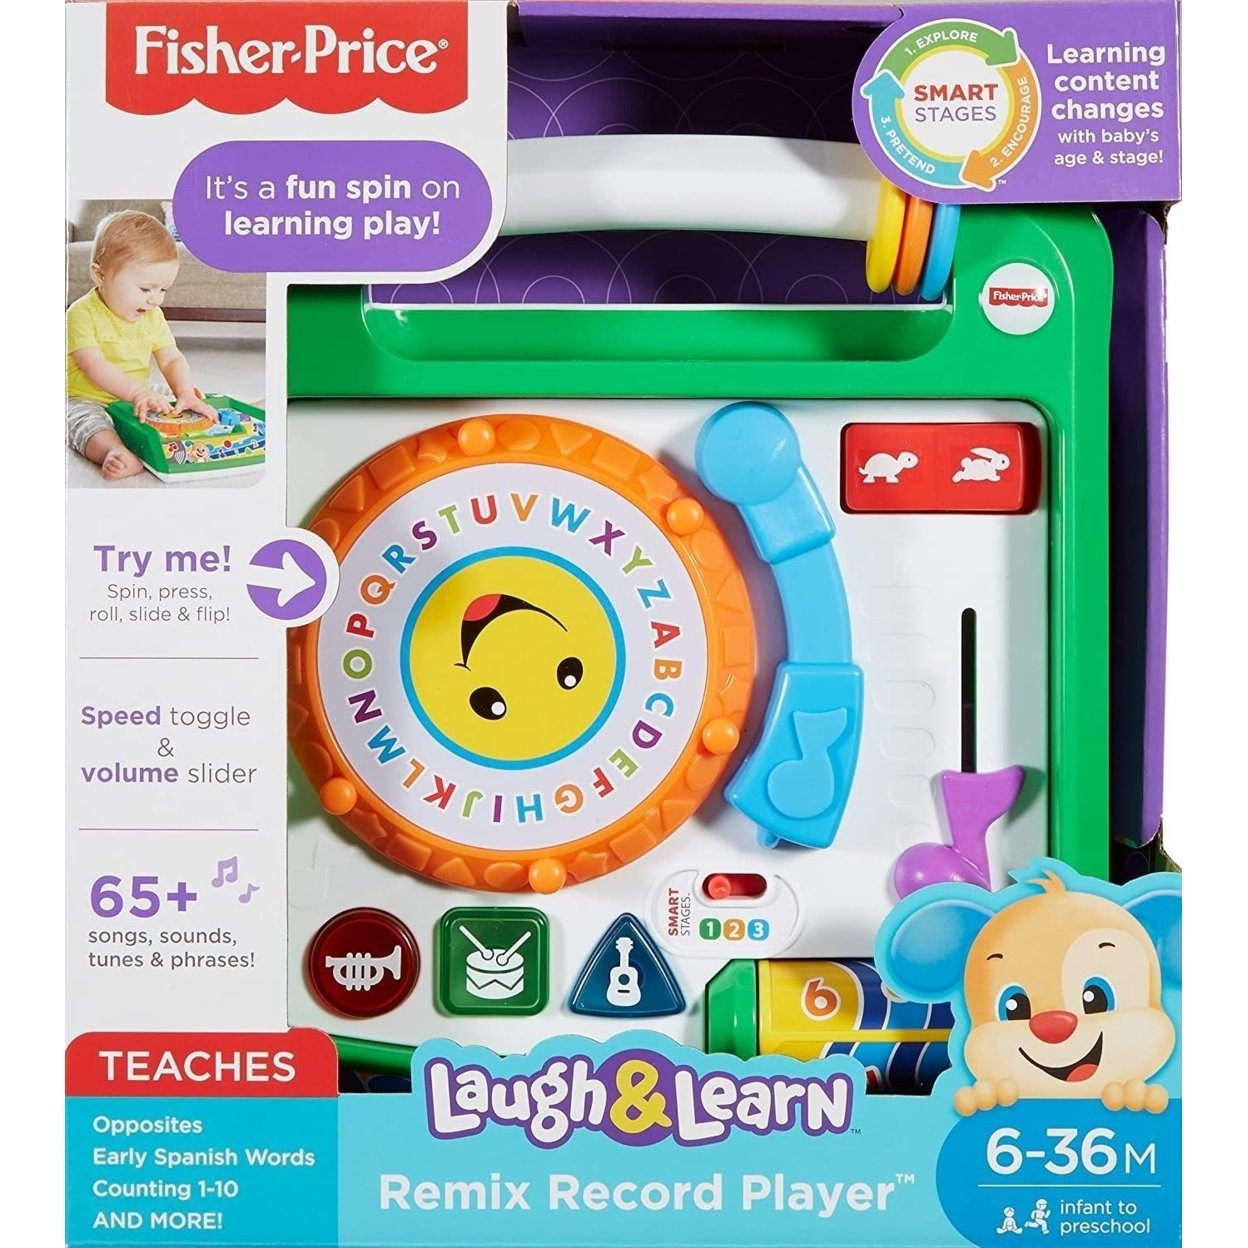 Fisher-Price Fisher-Price Laugh & Learn Remix Record Player Learning Musical Baby Toy GYC92